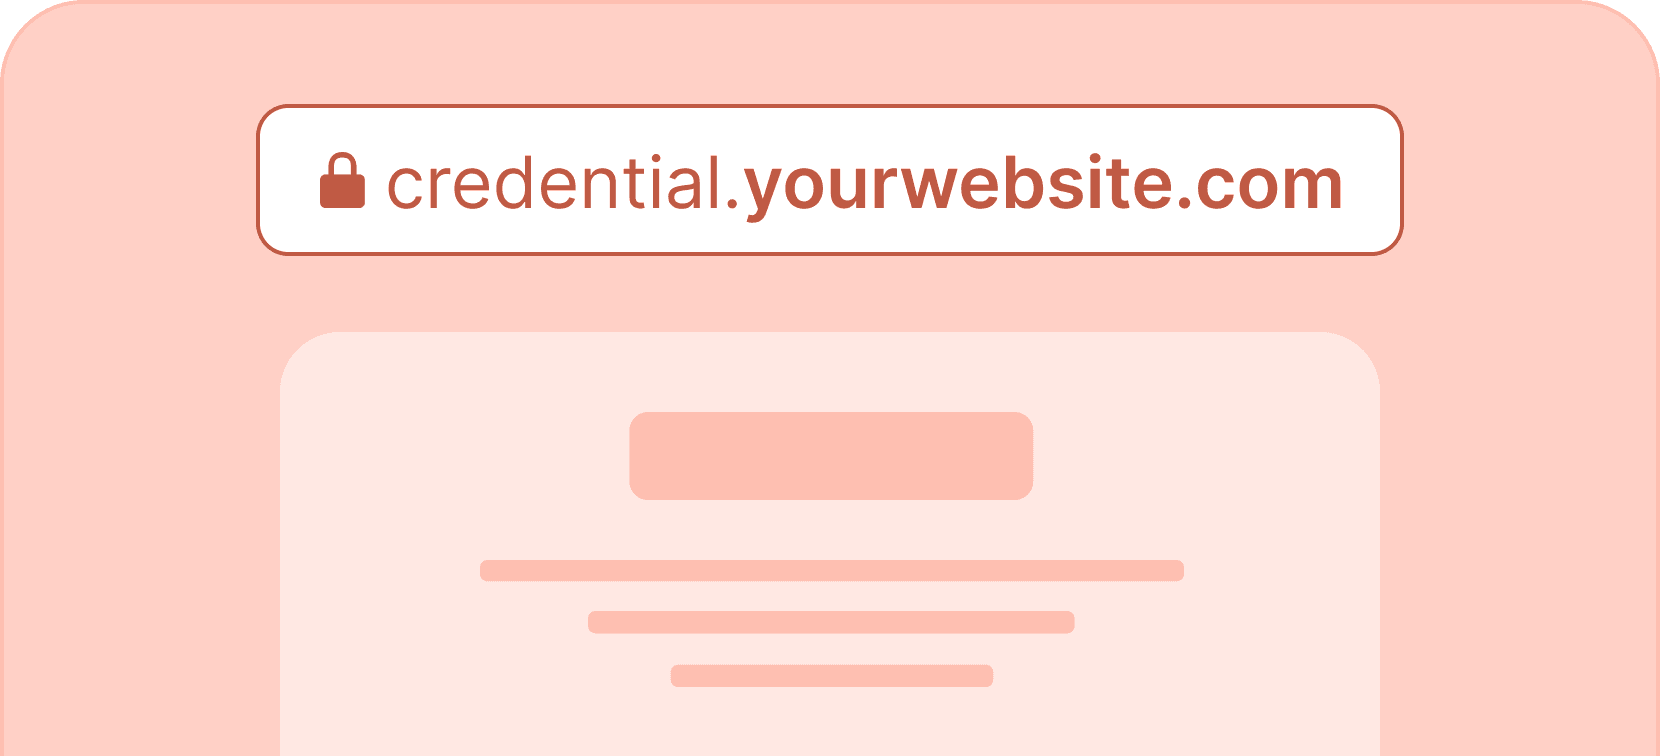 Host credentials on own domain - Certifier features